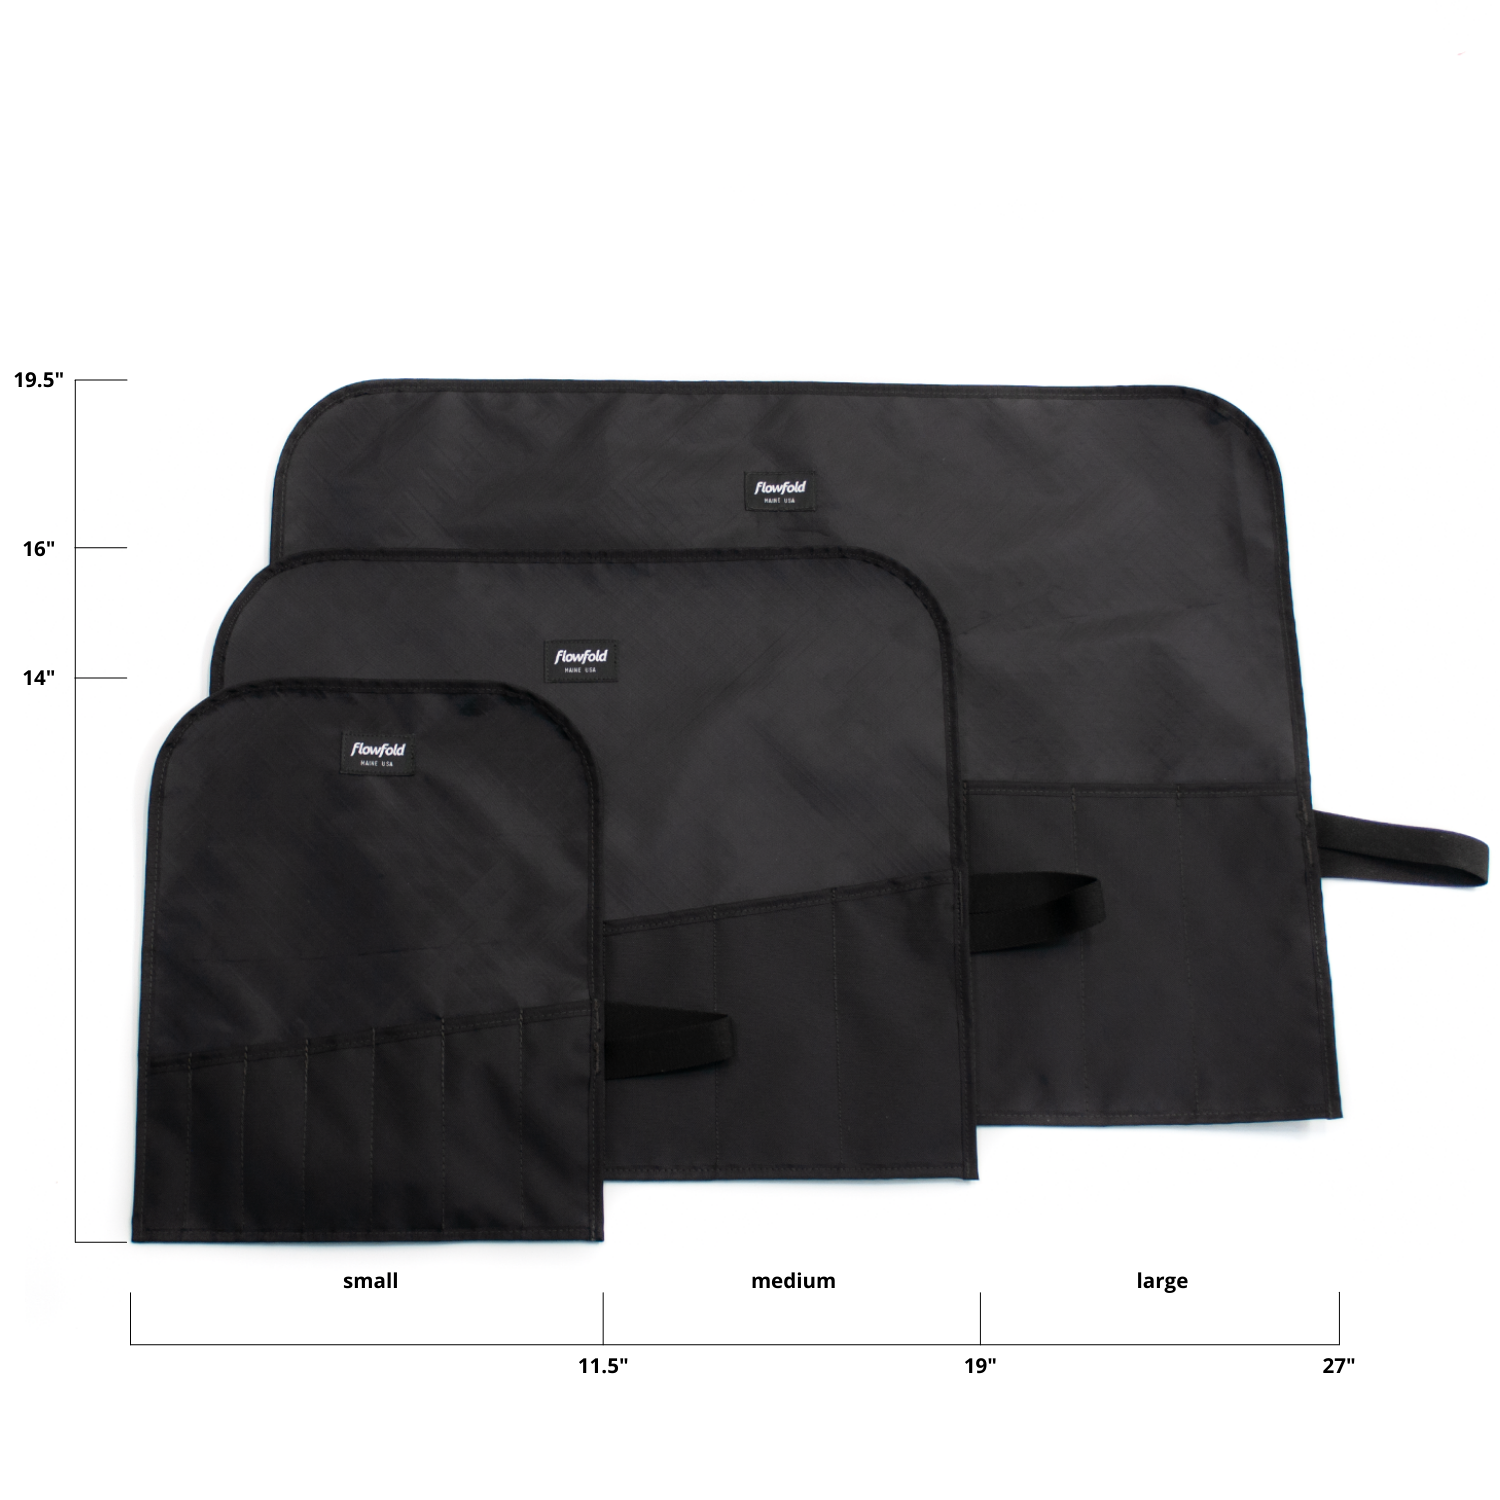 Flowfold Comrade Tool Roll Bundle - Black, 100% Recycled fabric tool roll, water repellent and made in USA